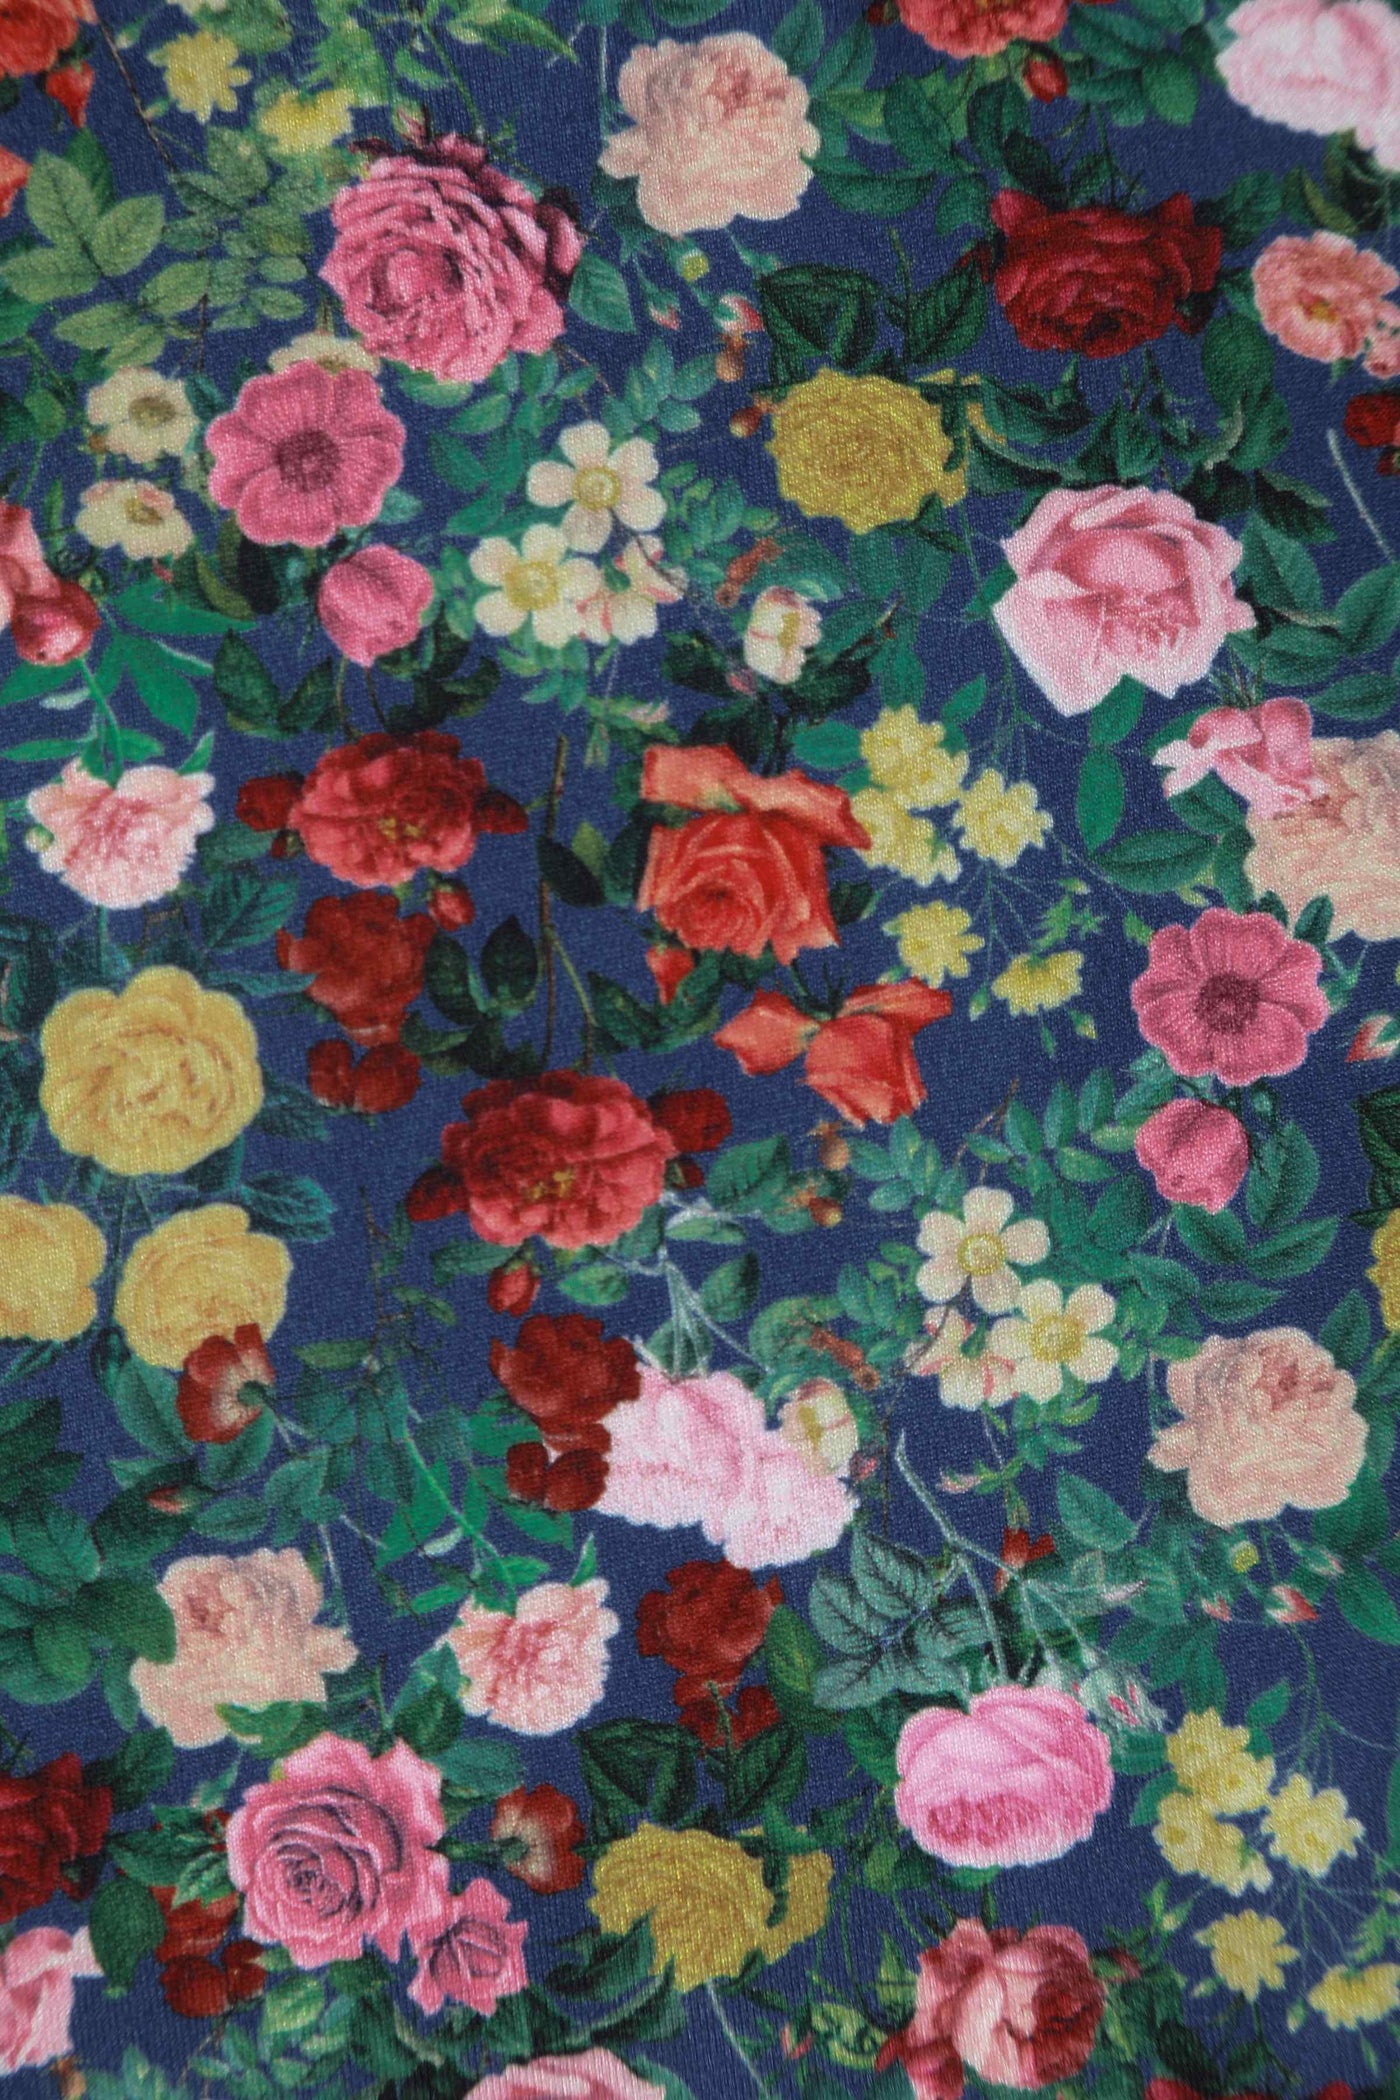 Close up View of Wrap Around Blue Floral Rose Garden Top in Navy and Red